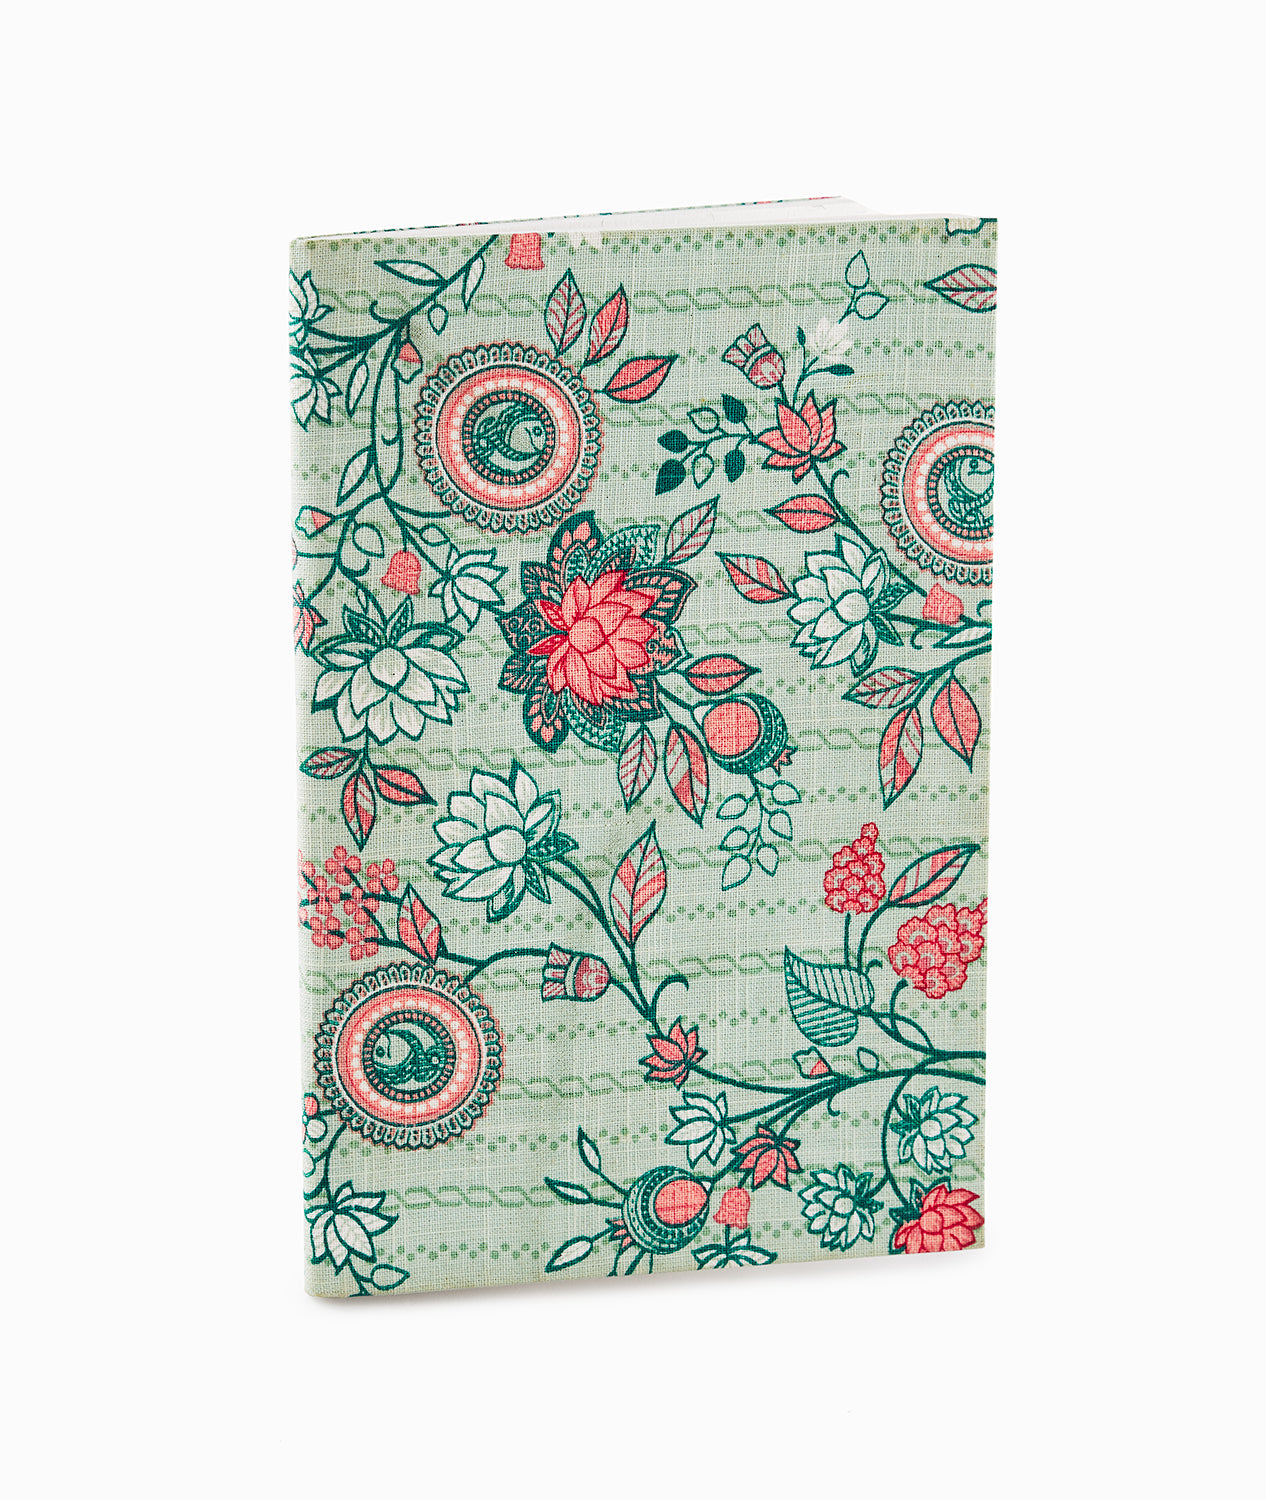 Pistachio Green Color With Flower design Diary cloth with Diary -Upcycled Diary!